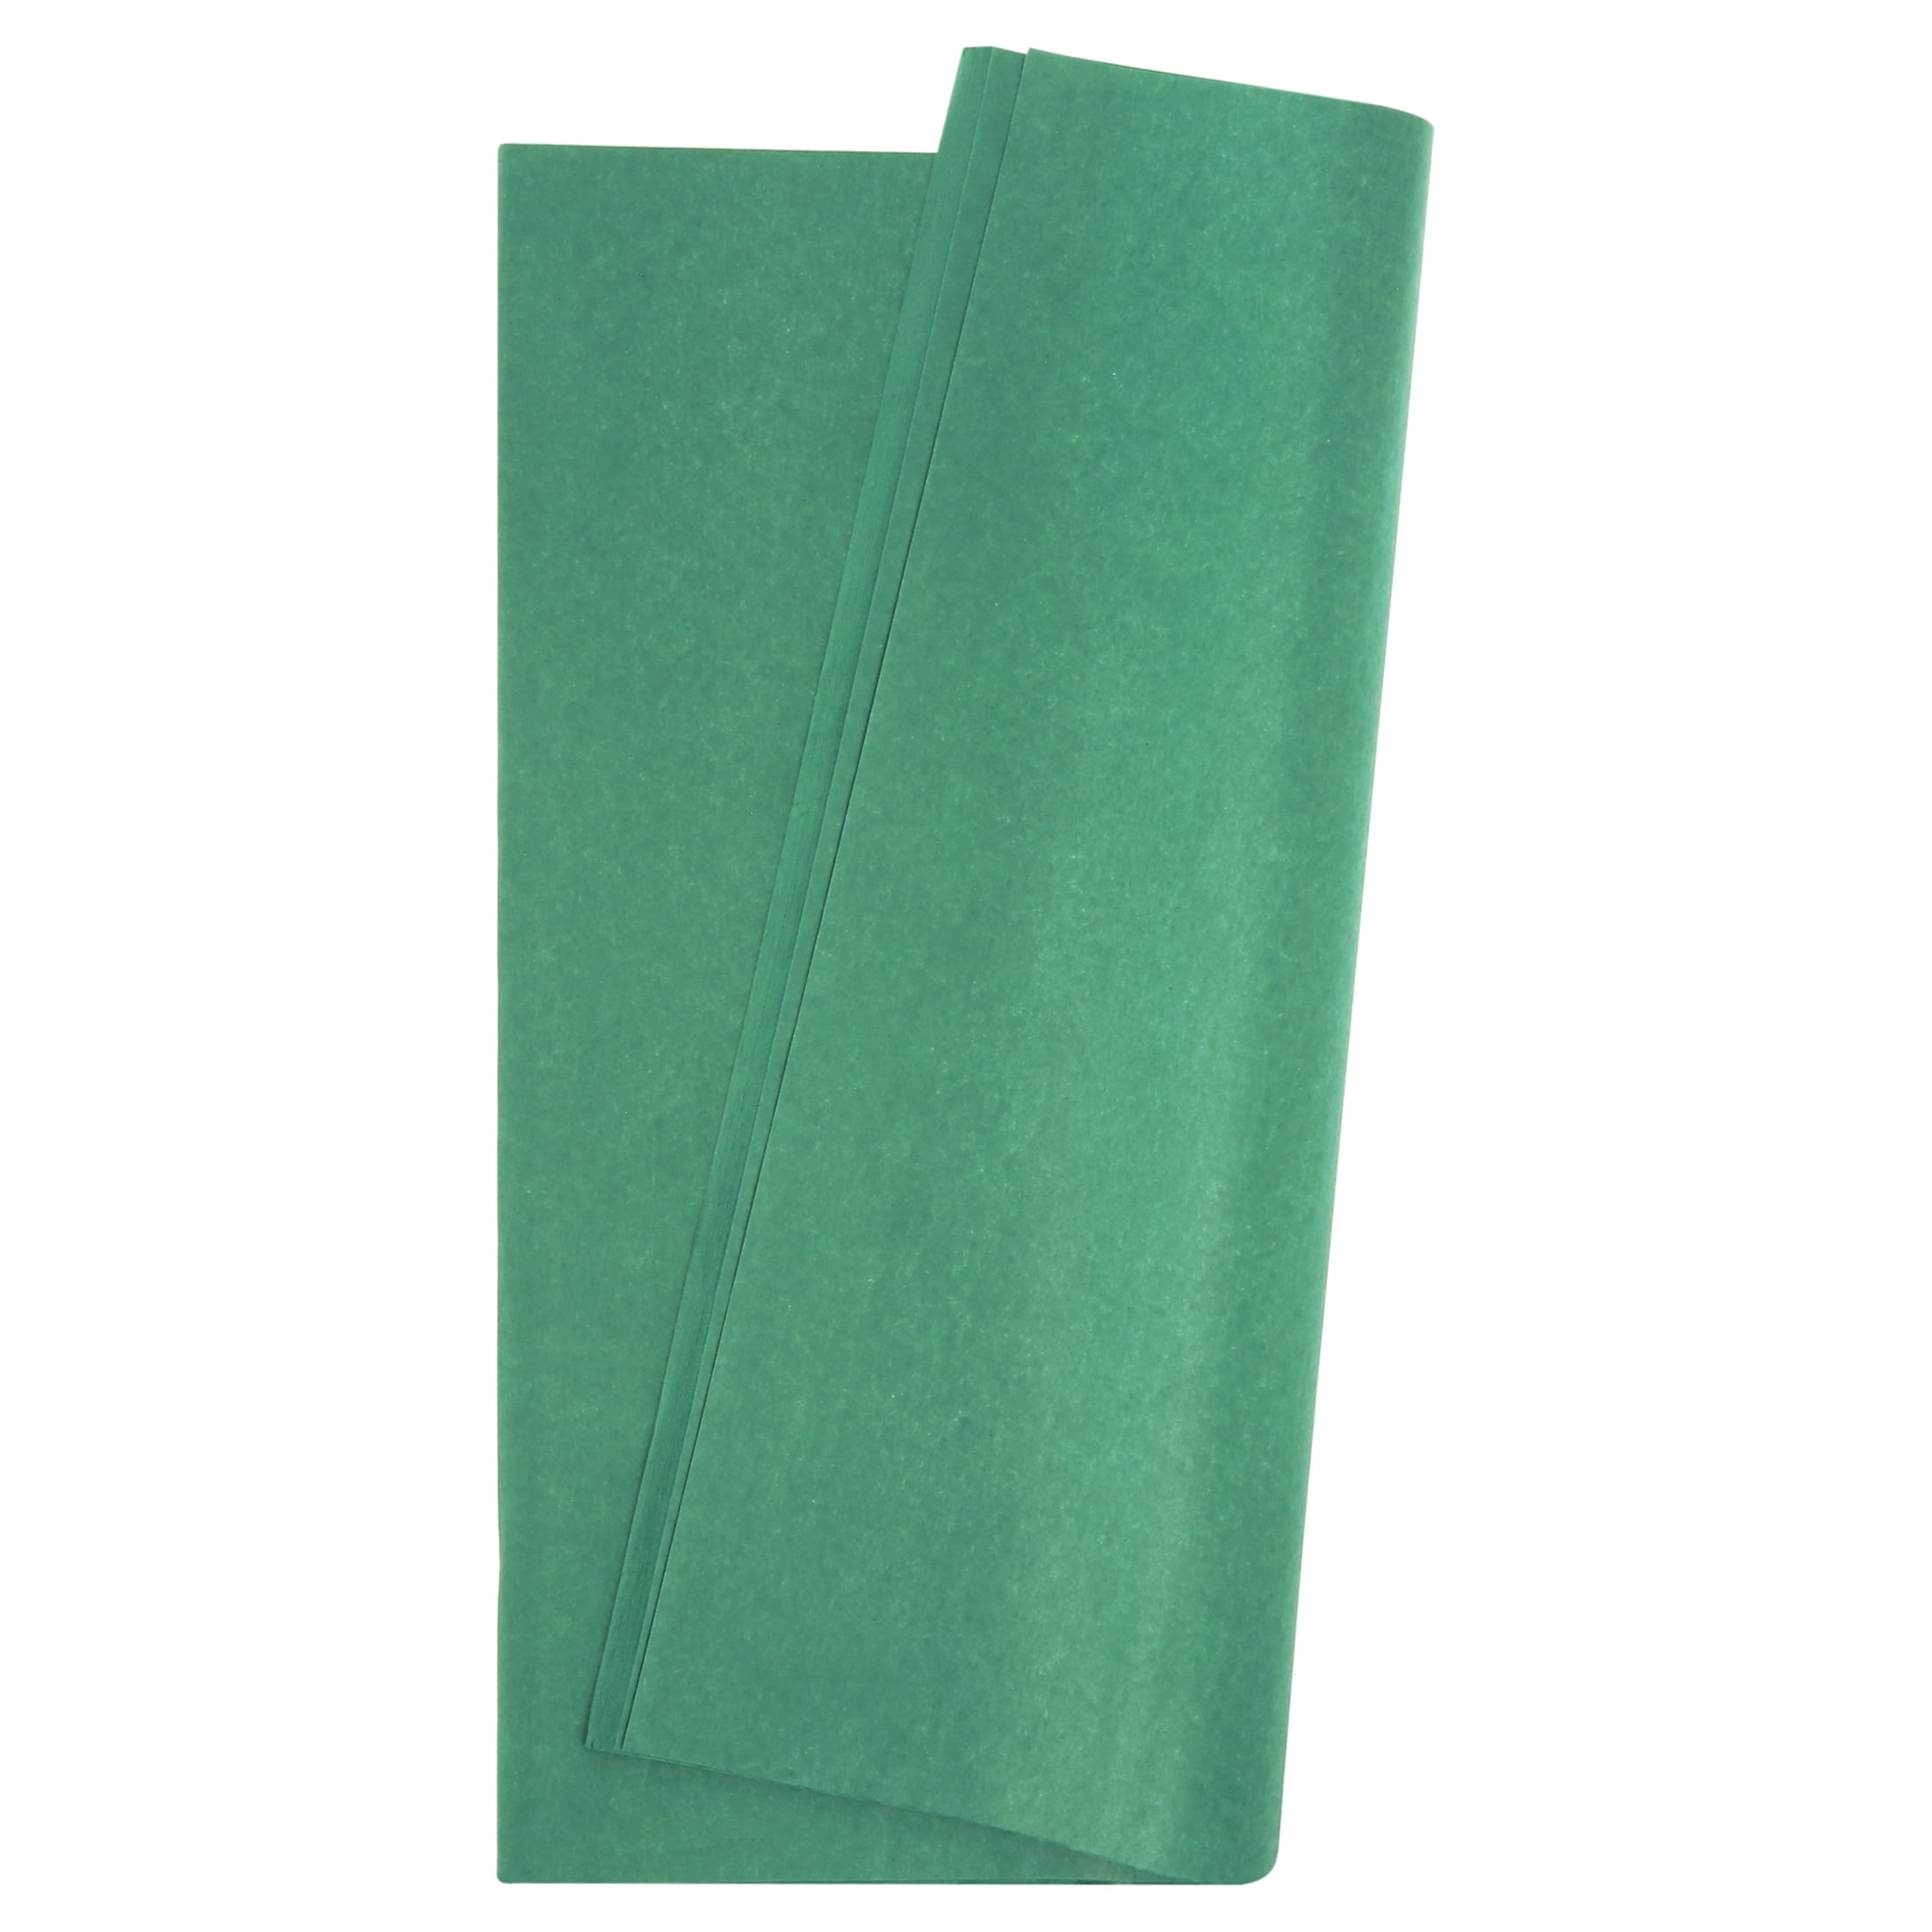 Holiday Green Wrap Tissue Paper 15 inch x 20 inch - 100 Sheets